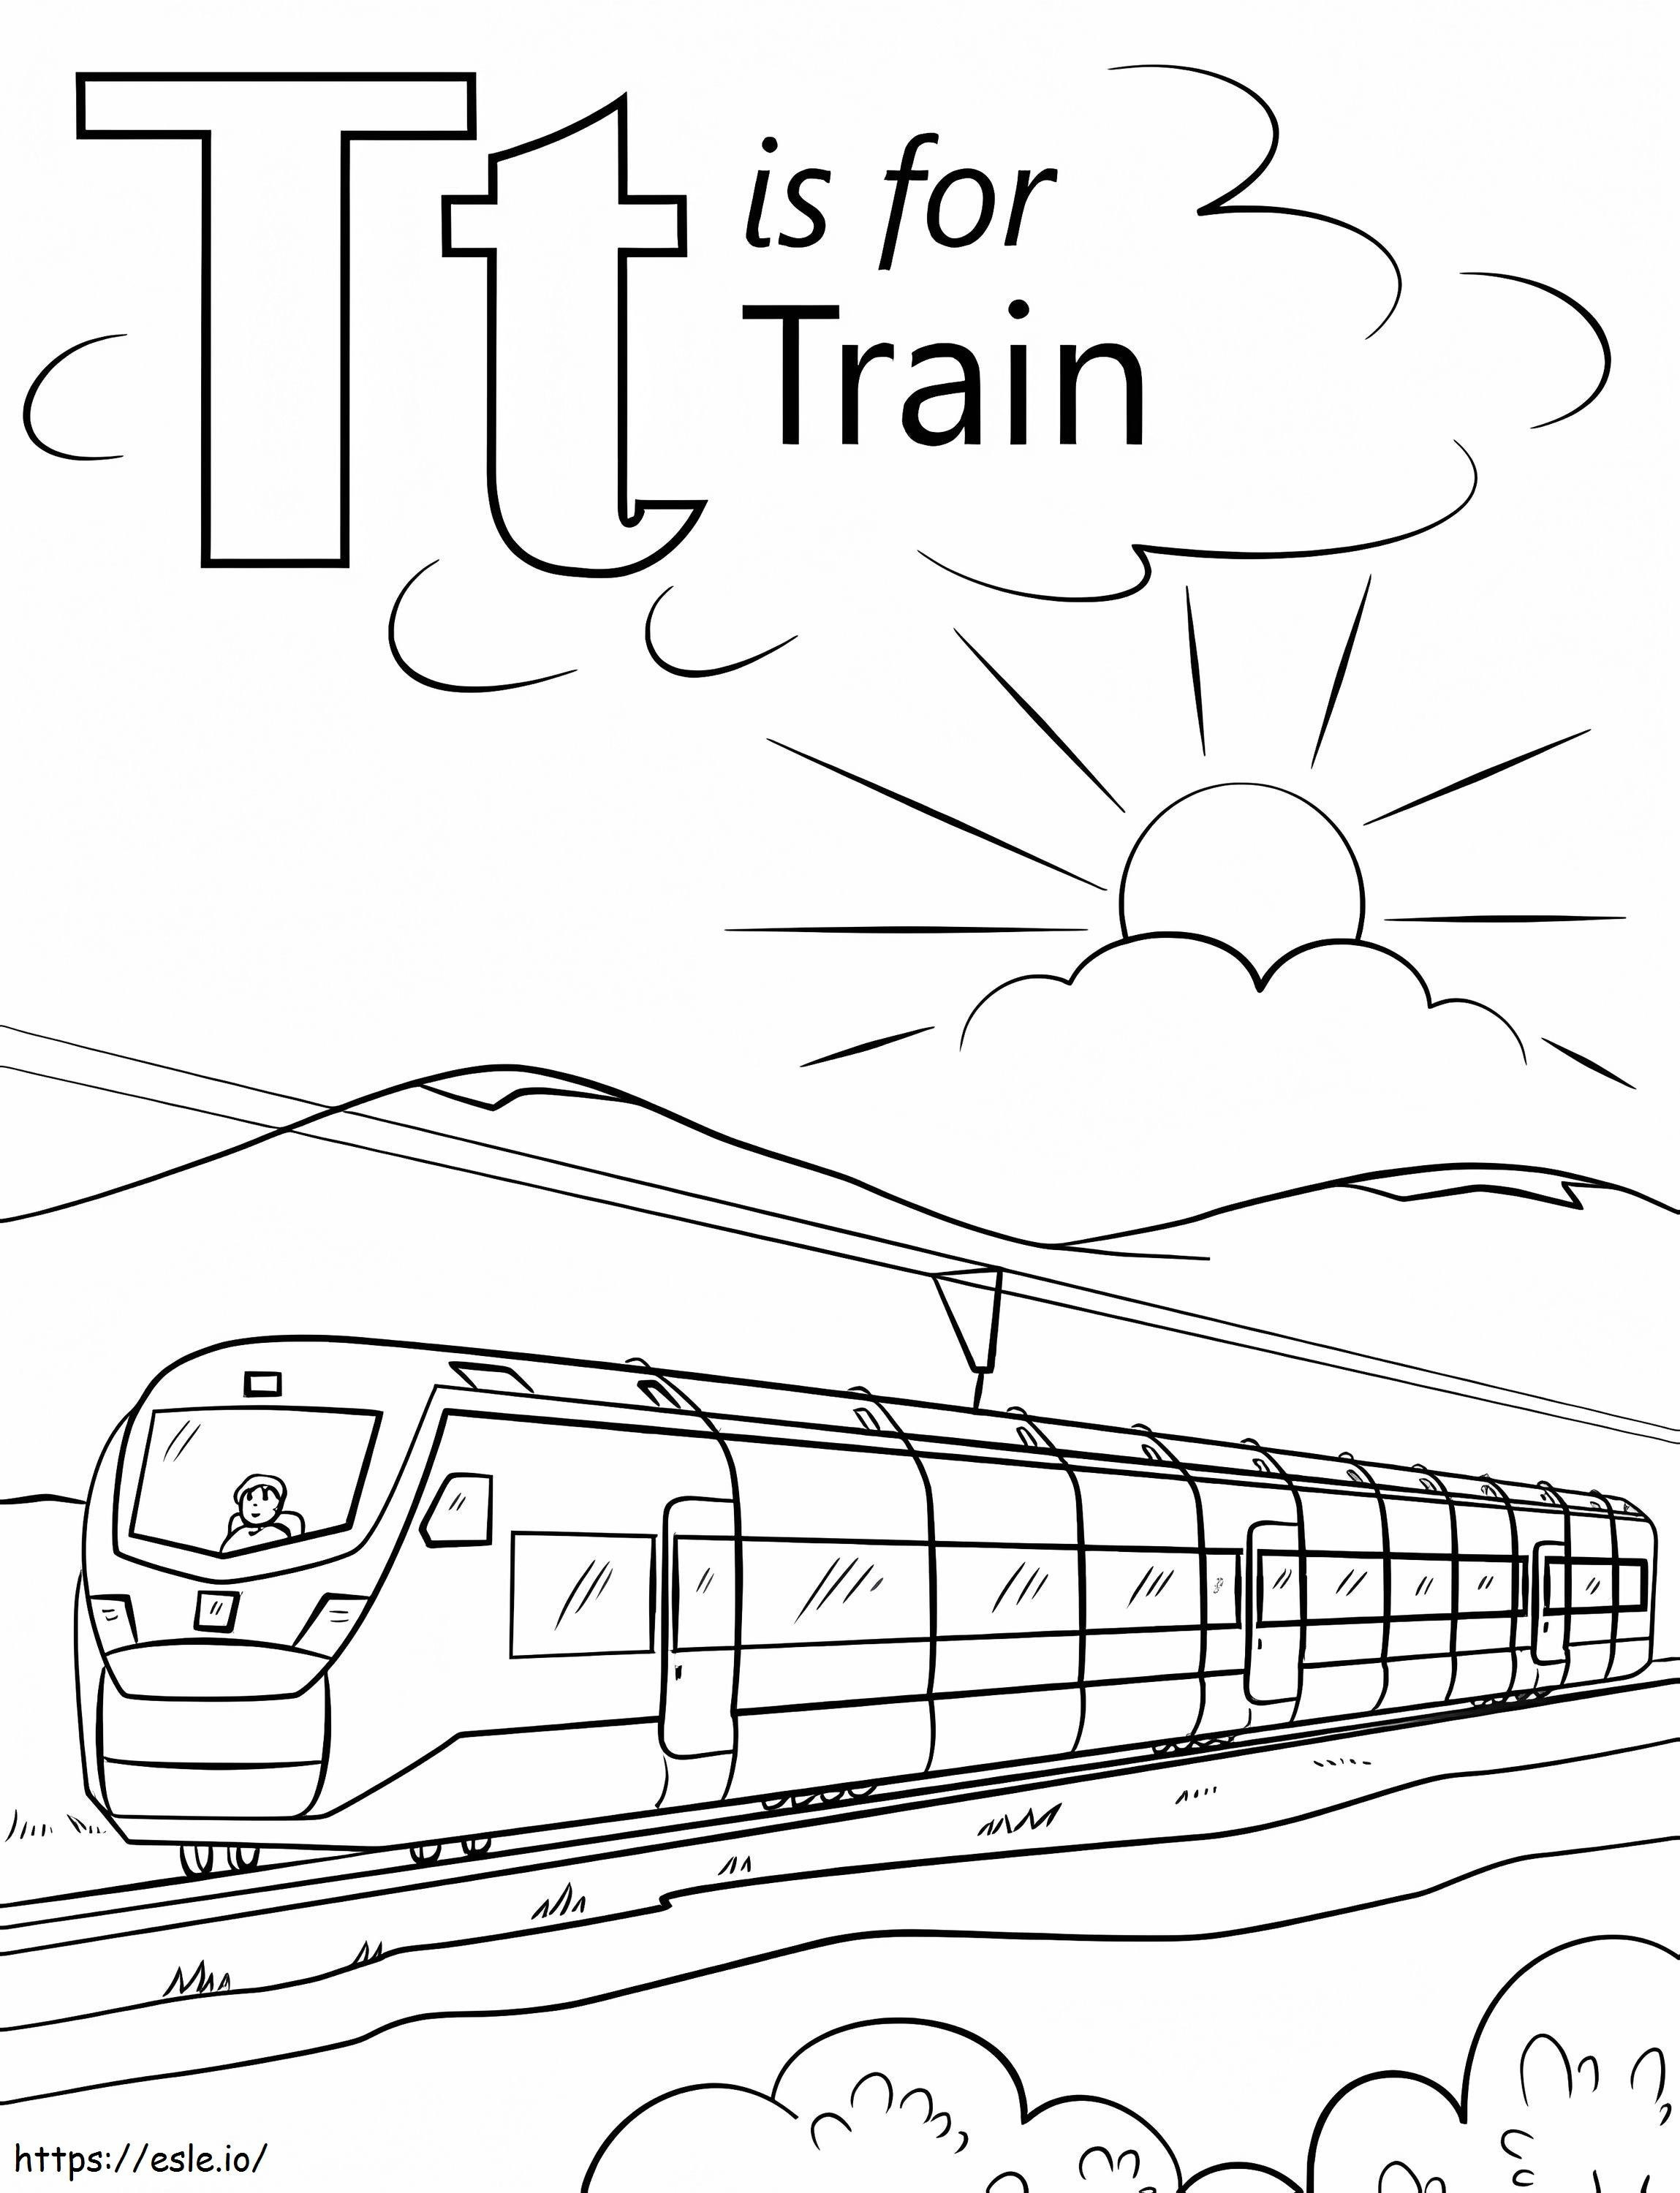 Letter T Train coloring page